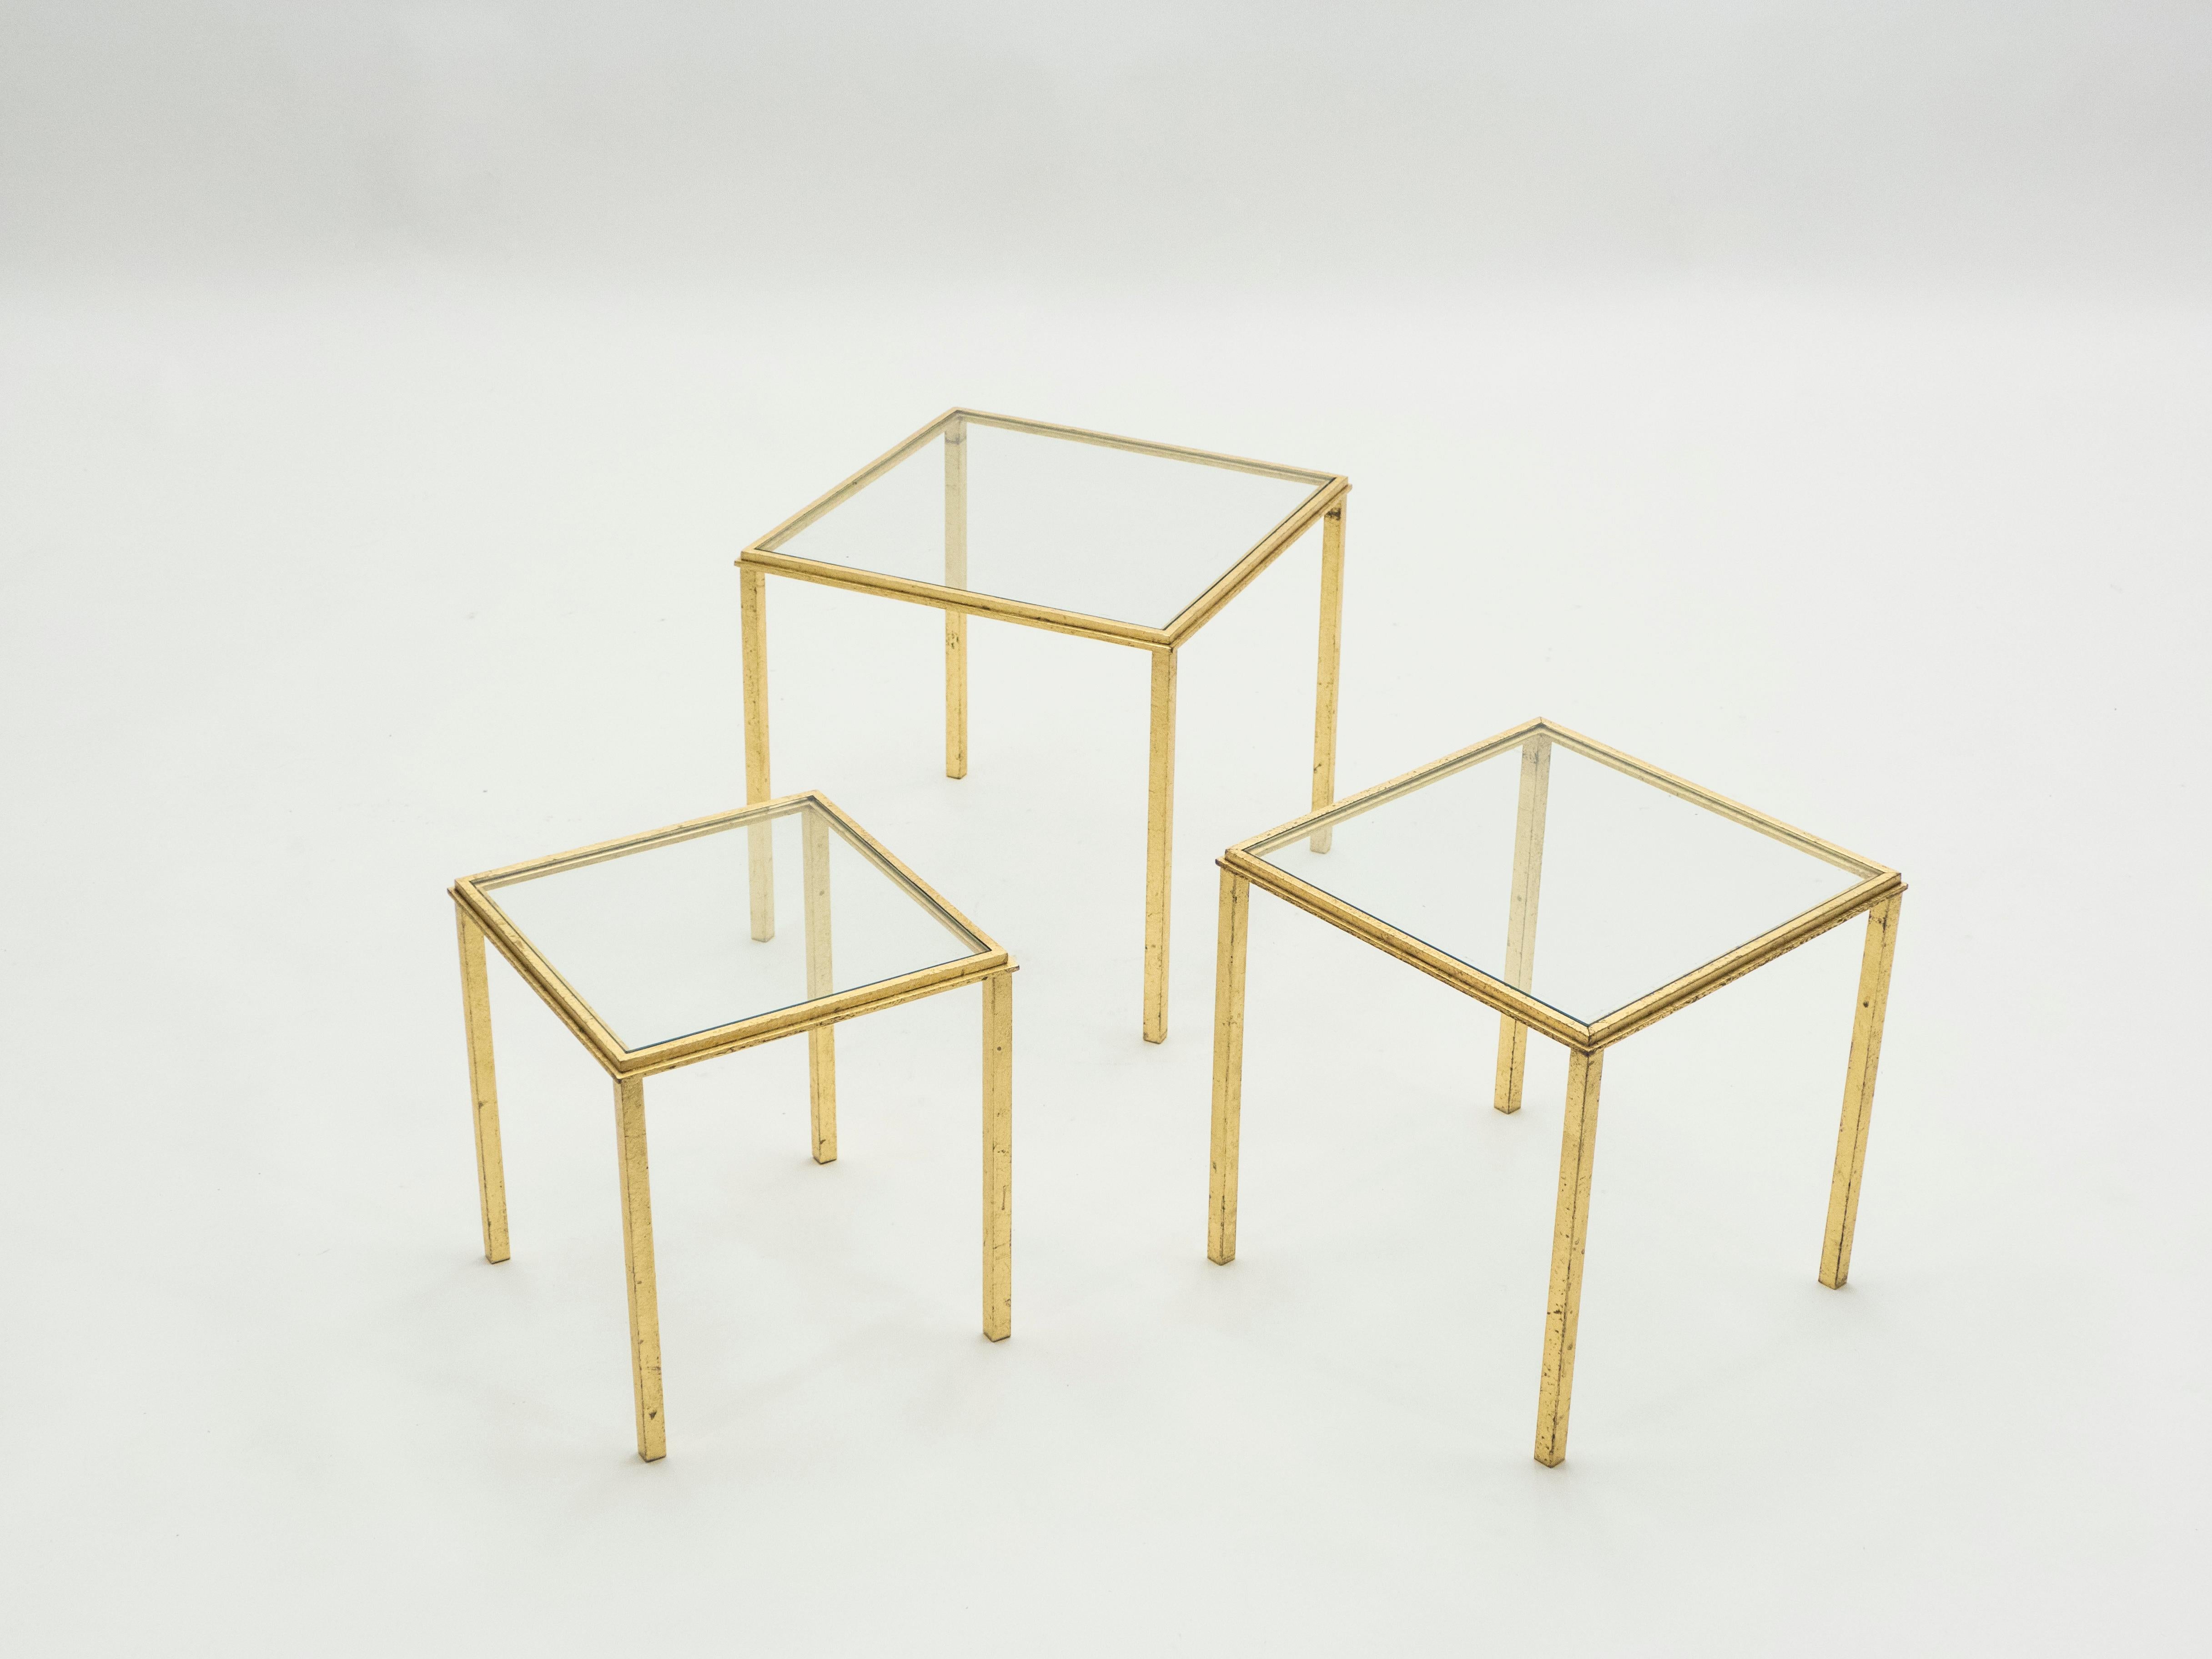 Simple lines point to this nesting tables midcentury roots. Designed by Roger and Robert Thibier, it features silky wrought iron legs that has been gilded with gold leaf for a gentle warm golden patina throughout the entire structure. Its symmetry,